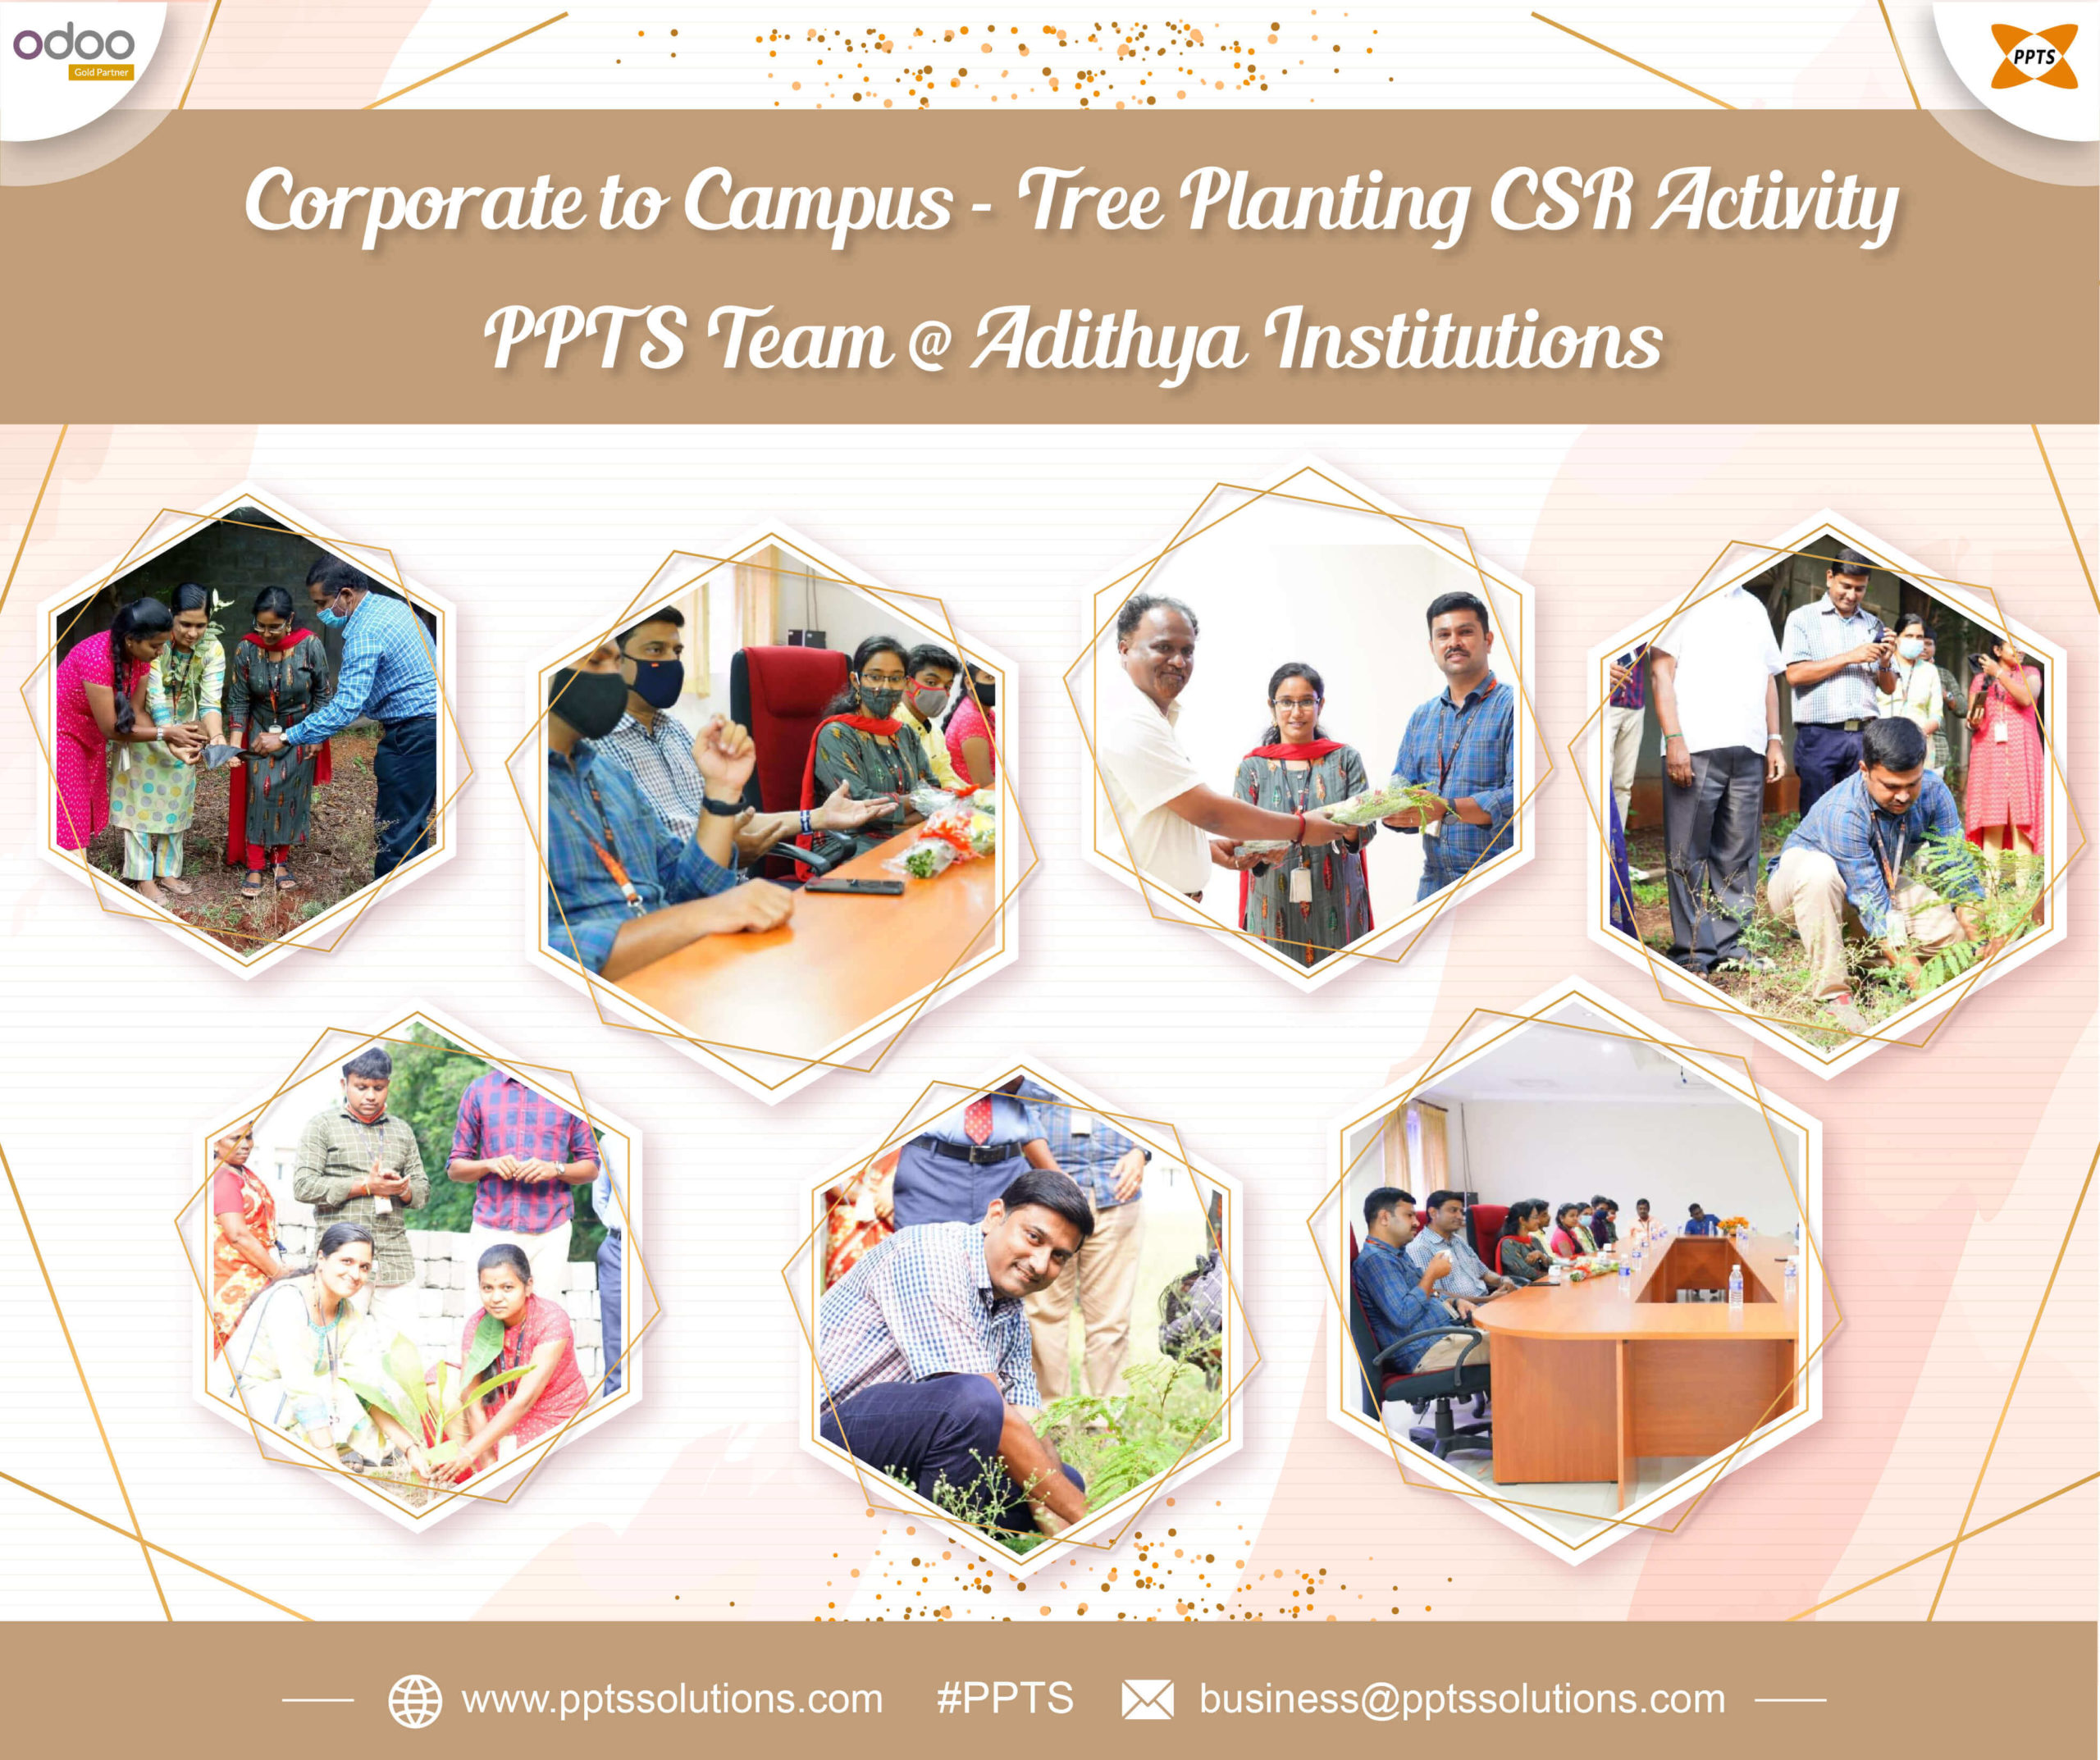 Corporate-to-campus-tree-planting-CSR-activity-PPTS-team-&-Adithya-Institutions